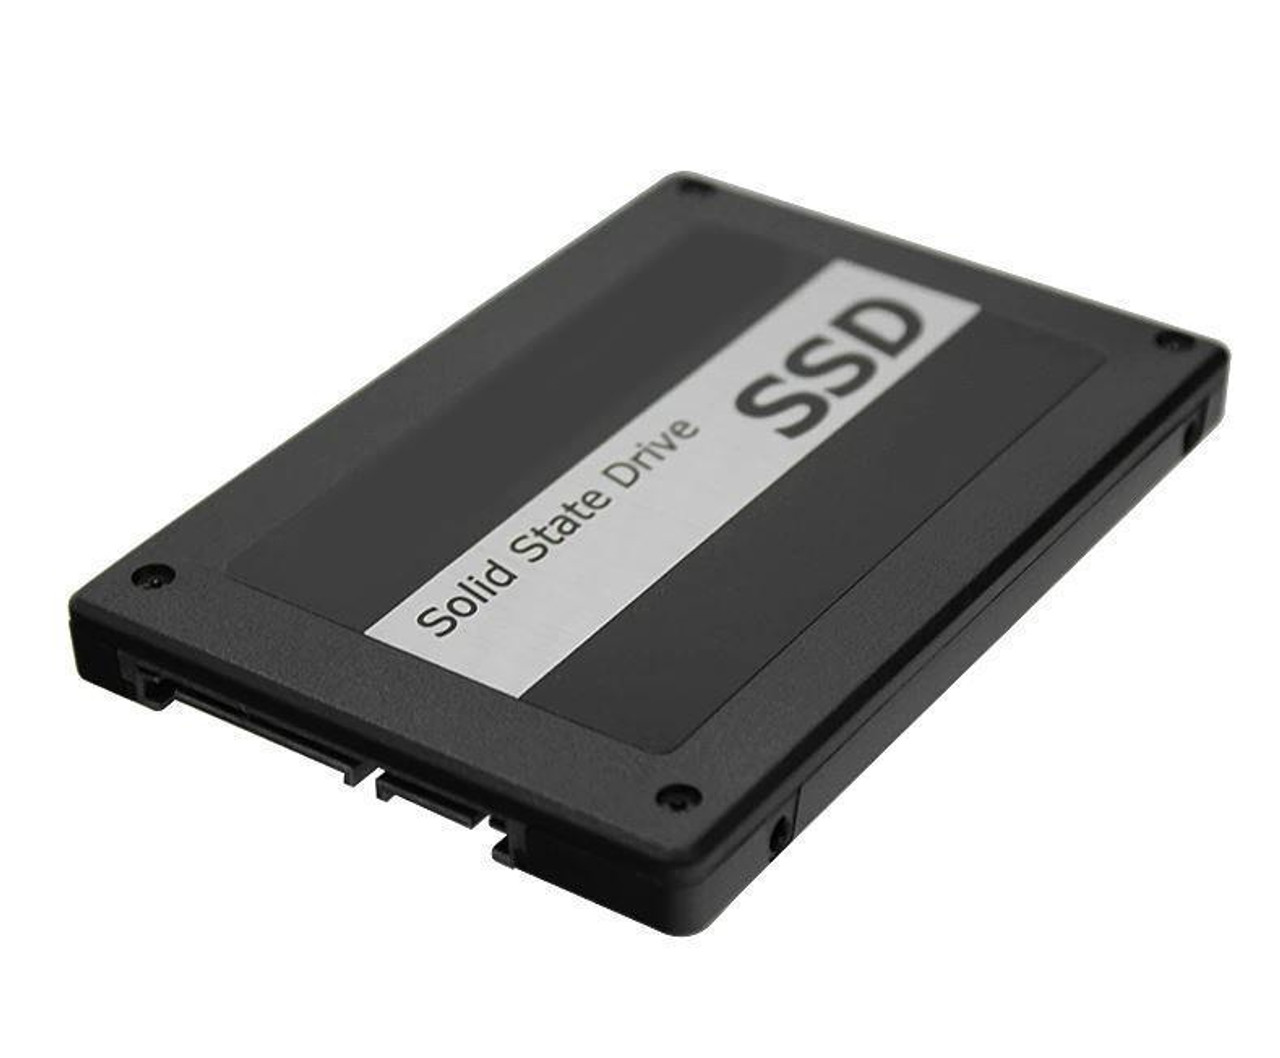 Accortec 800GB SAS 12Gbps 2.5-inch Internal Solid State Drive (SSD)